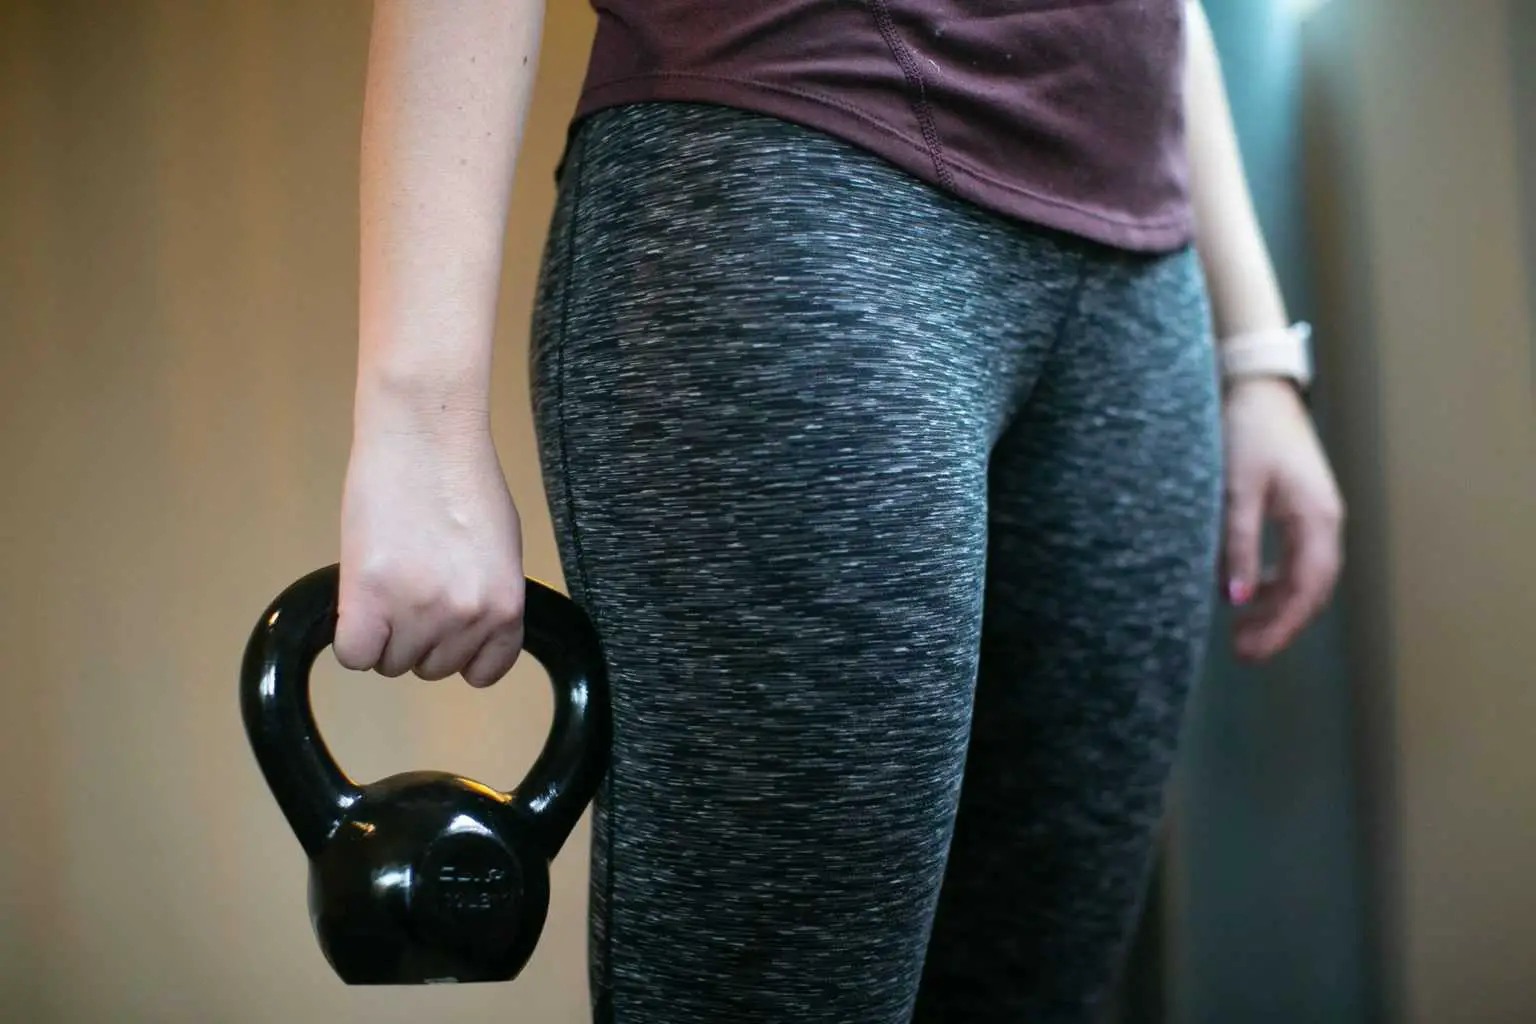 Woman holding a kettlebell in one hand